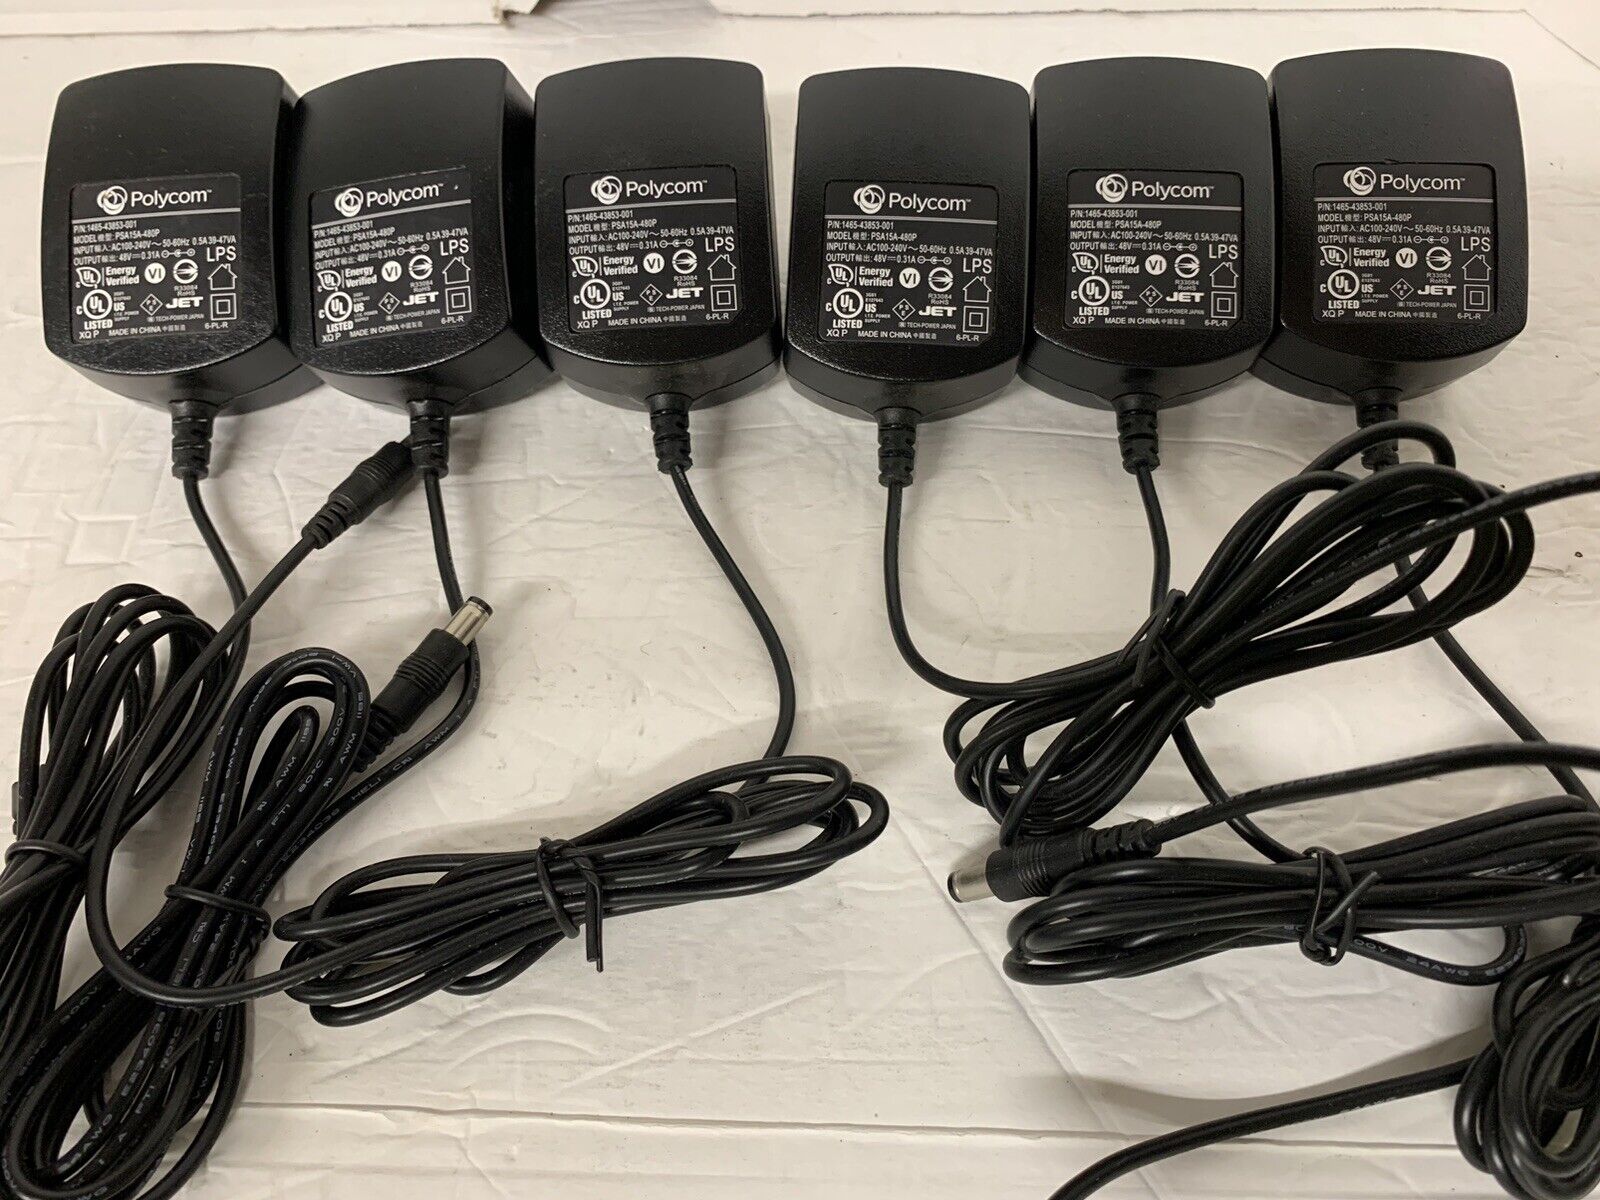 Lot of 6 NEW Genuine Polycom AC Power Supply Adapter 48V 0.31A for VoIP Phones